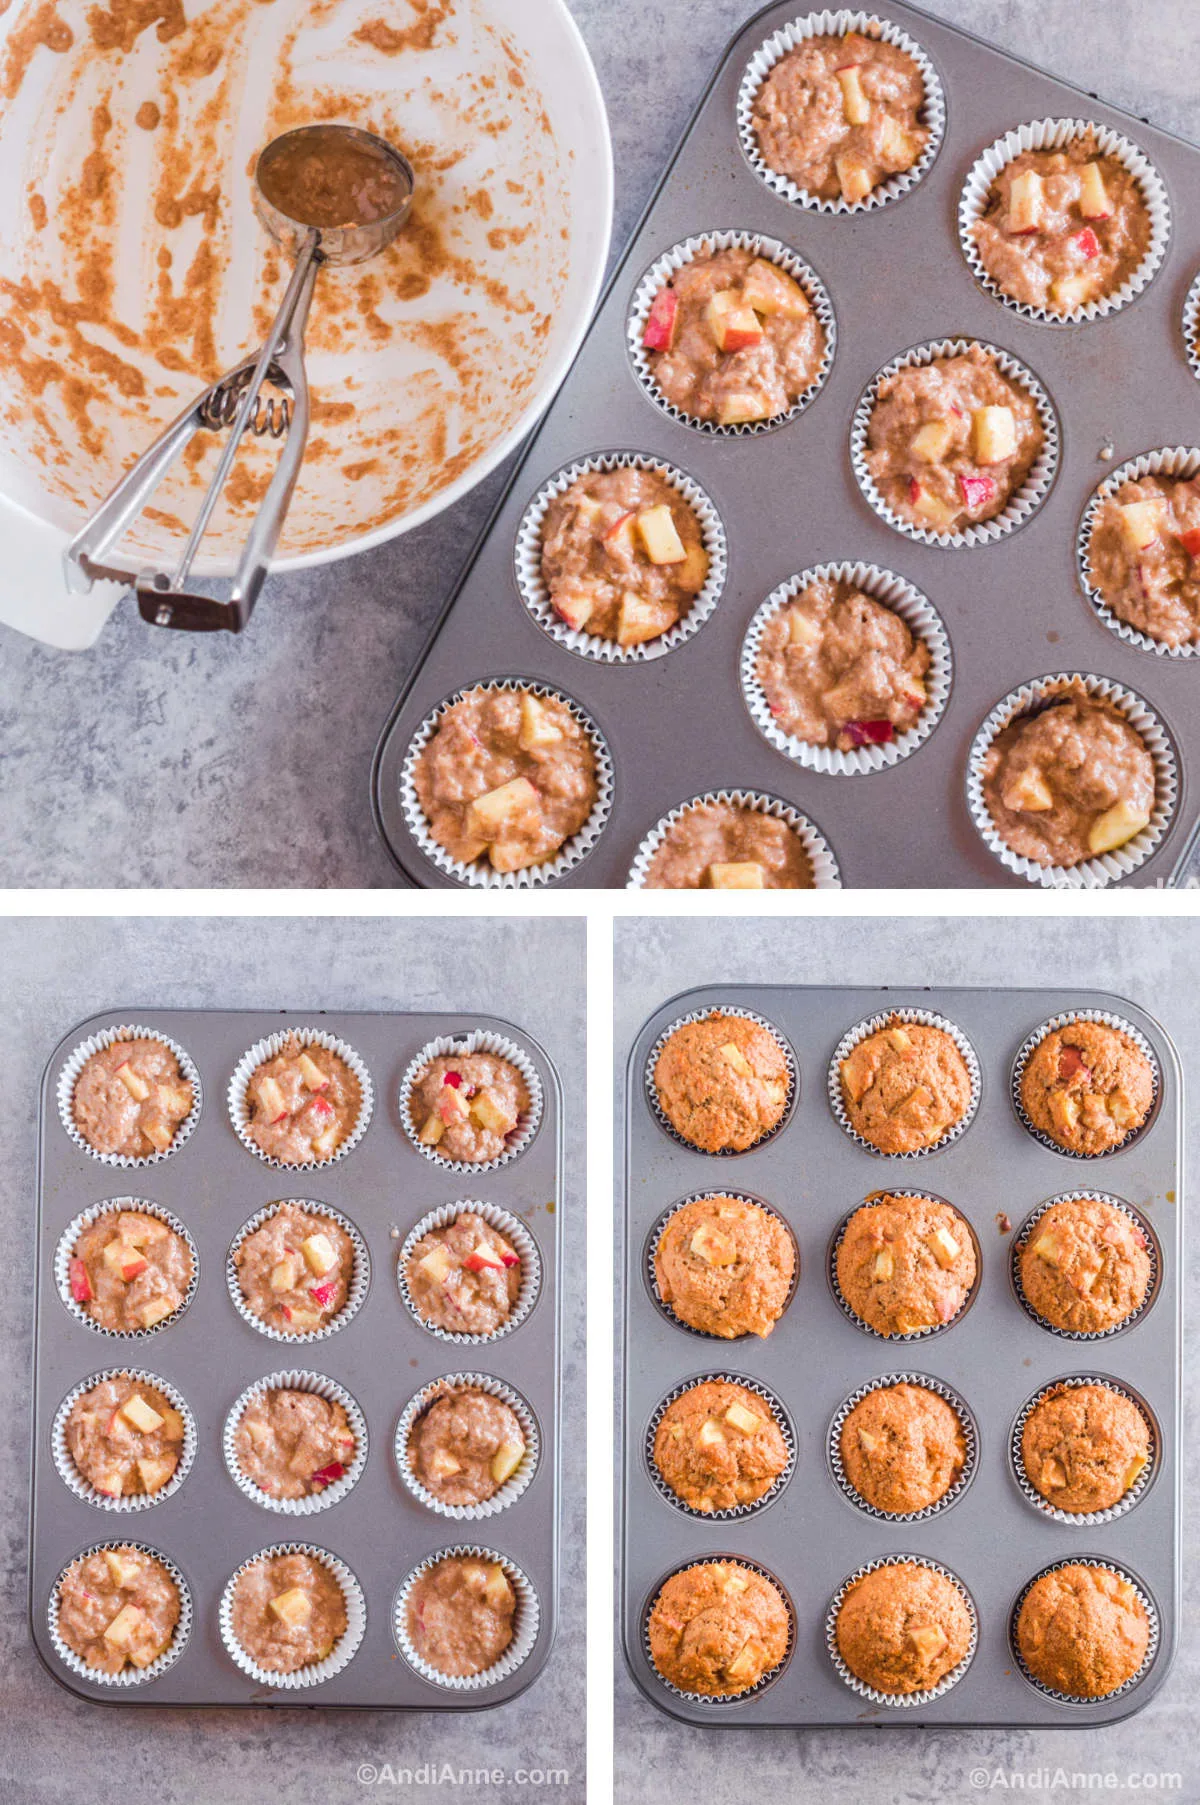 Three overhead images in one: 1. Batter added to muffin tin. 2. Batter added to muffin tin full view. 3. View of all muffins in tin and baked. 